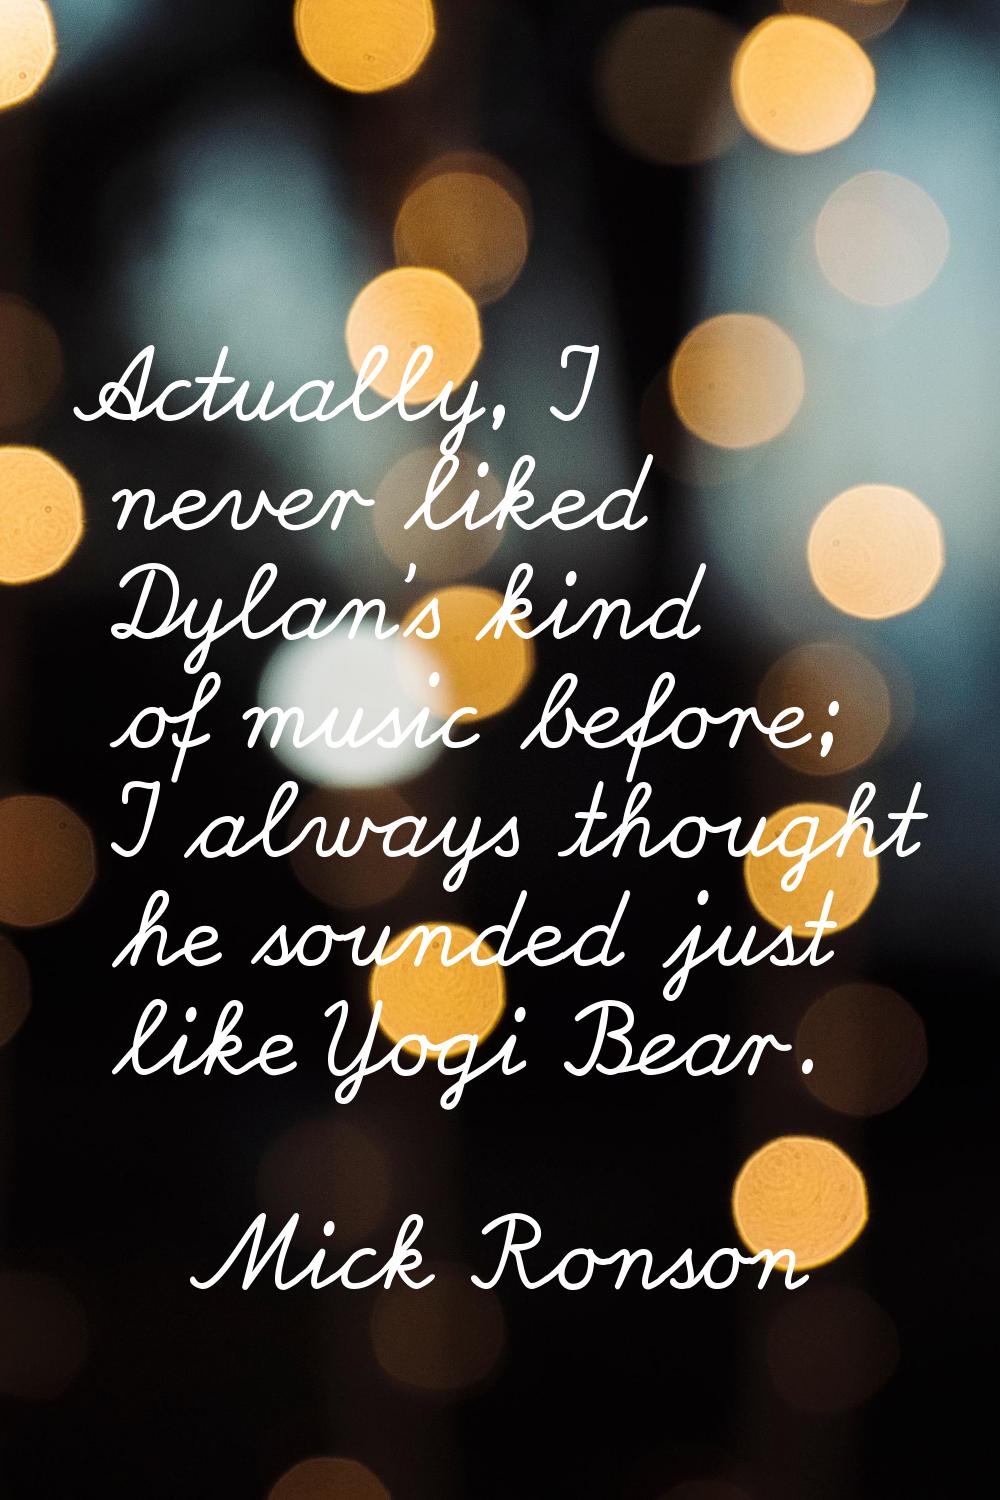 Actually, I never liked Dylan's kind of music before; I always thought he sounded just like Yogi Be